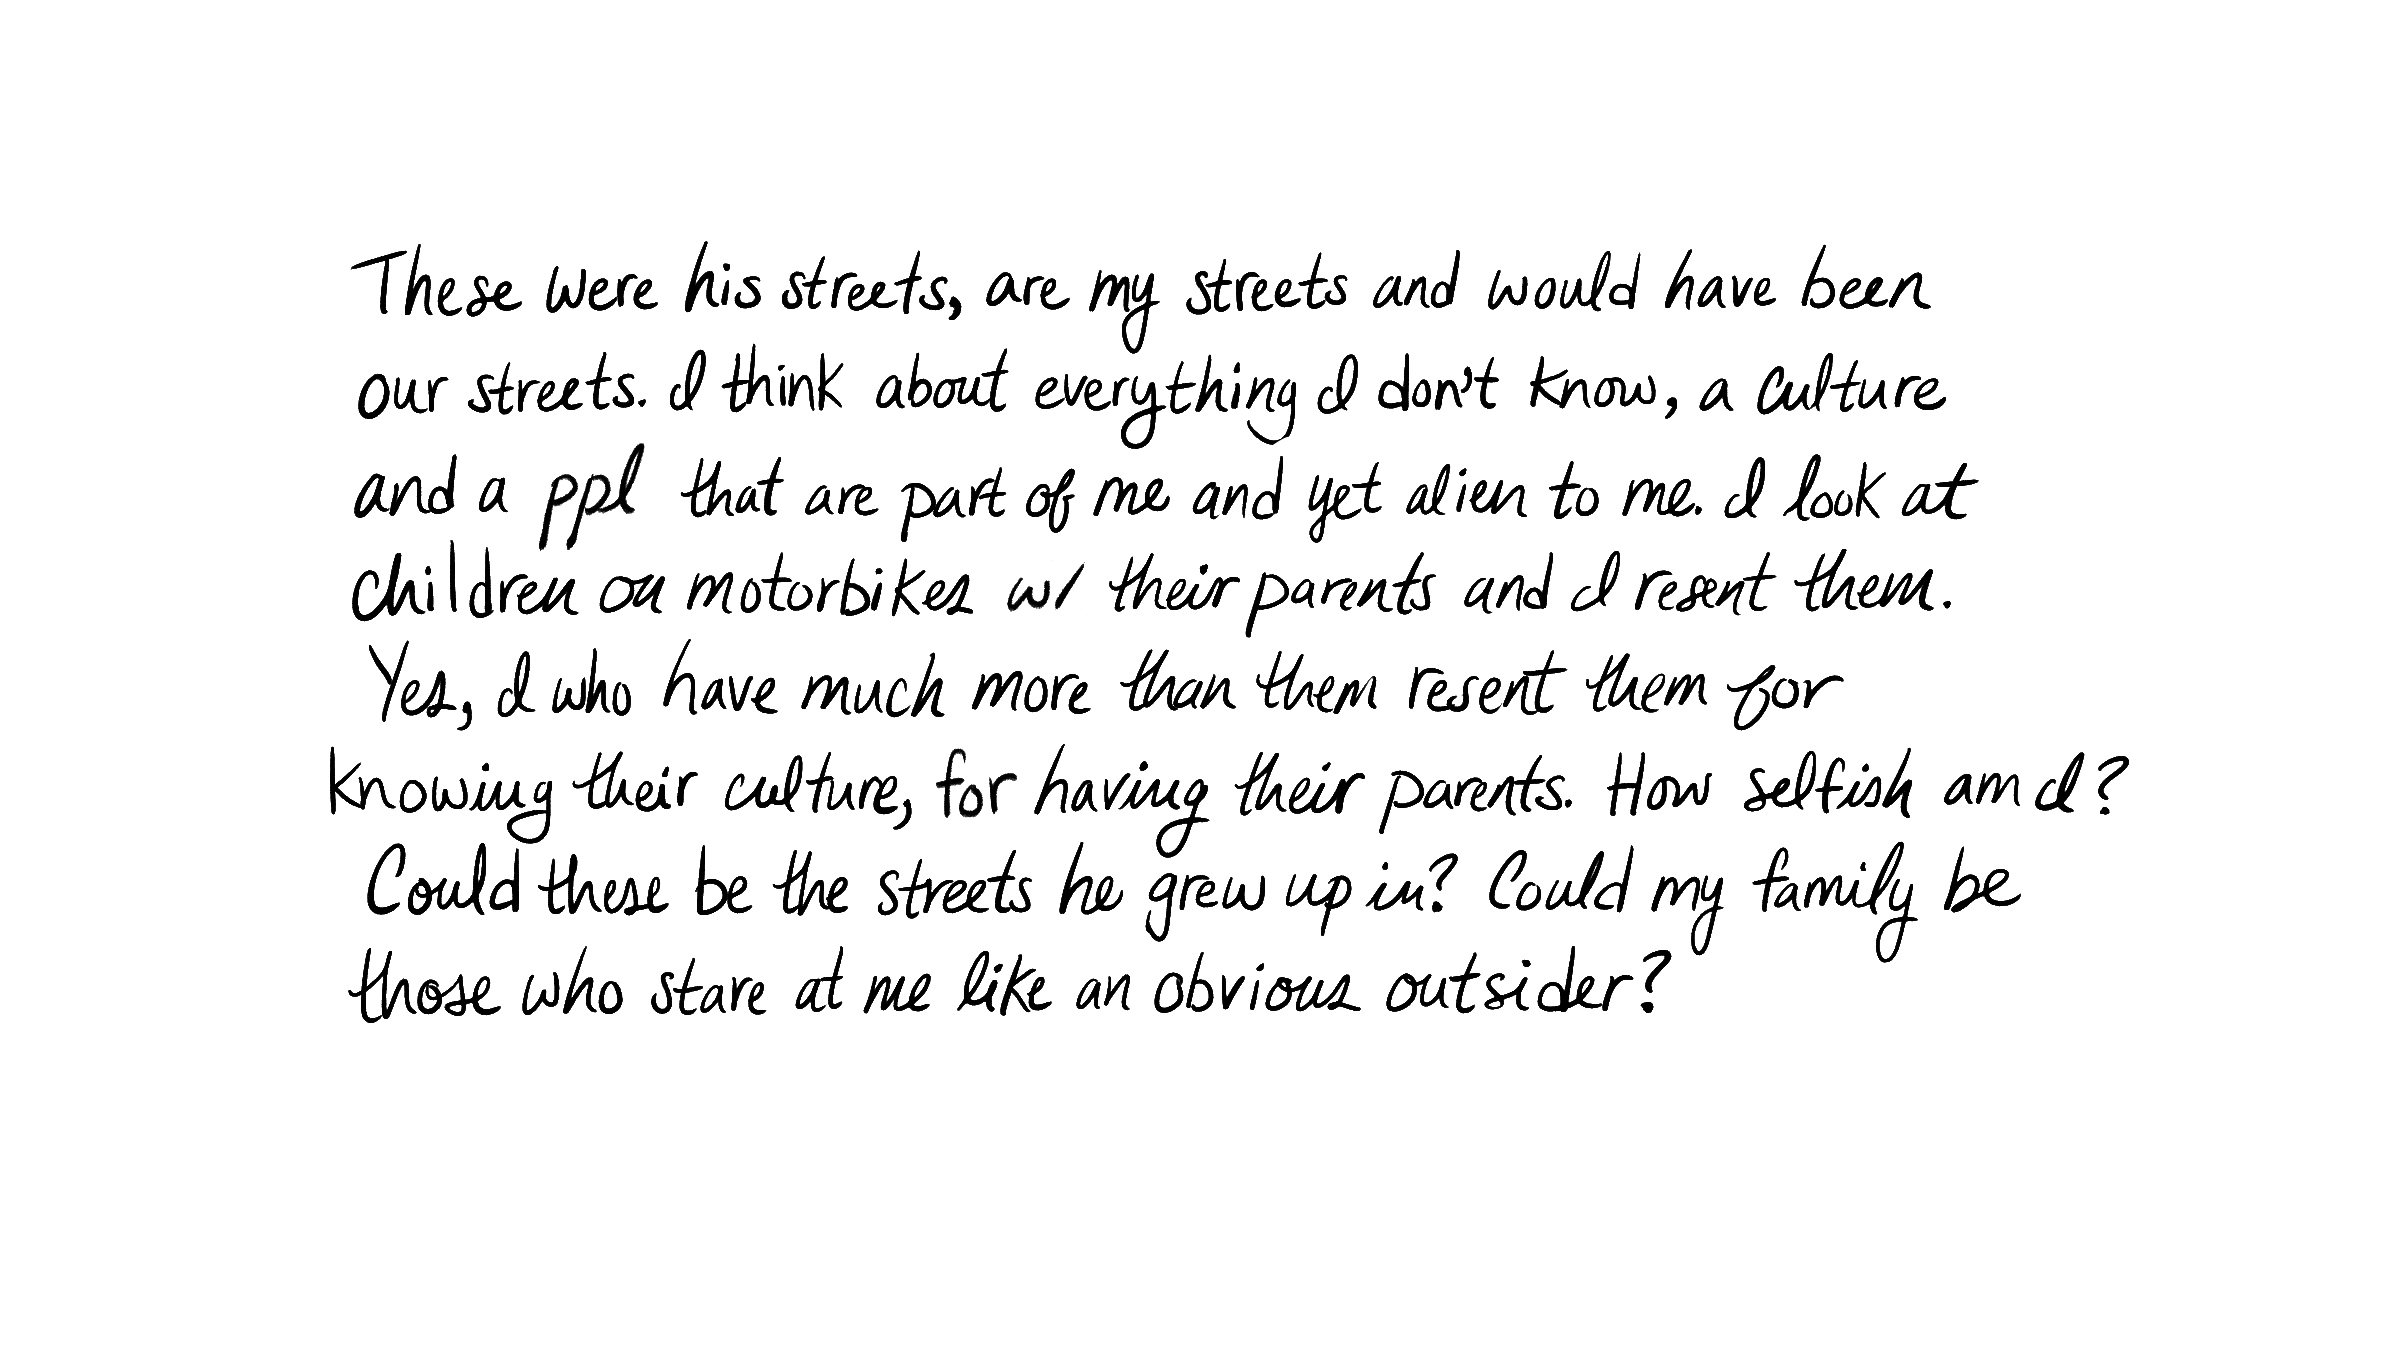 These were his streets, are my streets and would have been our streets. I think about everything I don't know, a culture and a ppl that are part of me and yet alien to me. I look at children on motorbikes w/ their parents and I resent them. Yes, I who have much more than them resent them for knowing their culture, for having their parents. How selfish am I? Could these be the streets he grew up in? Could my family be those who stare at me like an obvious outsider?